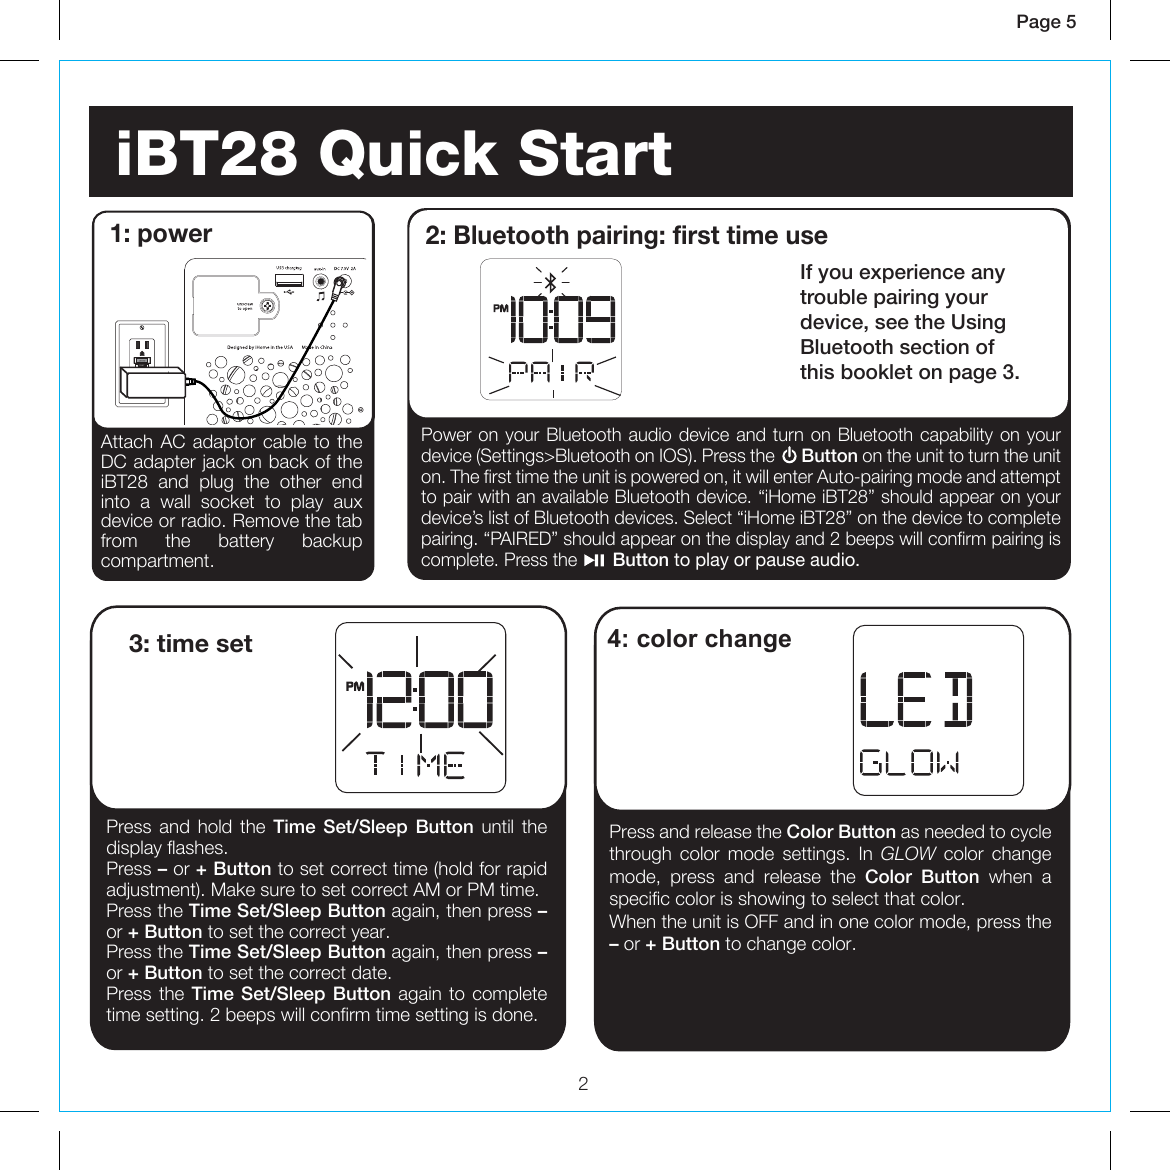 2Page 5  iBT28 Quick Start 1: powerPress and hold the Time Set/Sleep Button until the display flashes.Press – or + Button to set correct time (hold for rapid adjustment). Make sure to set correct AM or PM time.Press the Time Set/Sleep Button again, then press – or + Button to set the correct year.Press the Time Set/Sleep Button again, then press – or + Button to set the correct date.Press the Time Set/Sleep Button again to complete time setting. 2 beeps will confirm time setting is done.3: time setPress and release the Color Button as needed to cycle through color mode settings. In GLOW  color change mode, press and release the Color Button when a specific color is showing to select that color.When the unit is OFF and in one color mode, press the – or + Button to change color.4: color changeAttach AC adaptor cable to the DC adapter jack on back of the iBT28 and plug the other end into a wall socket to play aux device or radio. Remove the tab from the battery backup compartment.Power on your Bluetooth audio device and turn on Bluetooth capability on your device (Settings&gt;Bluetooth on IOS). Press the      Button on the unit to turn the unit on. The first time the unit is powered on, it will enter Auto-pairing mode and attempt to pair with an available Bluetooth device. “iHome iBT28” should appear on your device’s list of Bluetooth devices. Select “iHome iBT28” on the device to complete pairing. “PAIRED” should appear on the display and 2 beeps will confirm pairing is complete. Press the       Button to play or pause audio.2: Bluetooth pairing: first time useIf you experience any trouble pairing your device, see the UsingBluetooth section ofthis booklet on page 3.RESETRESETTESTTEST